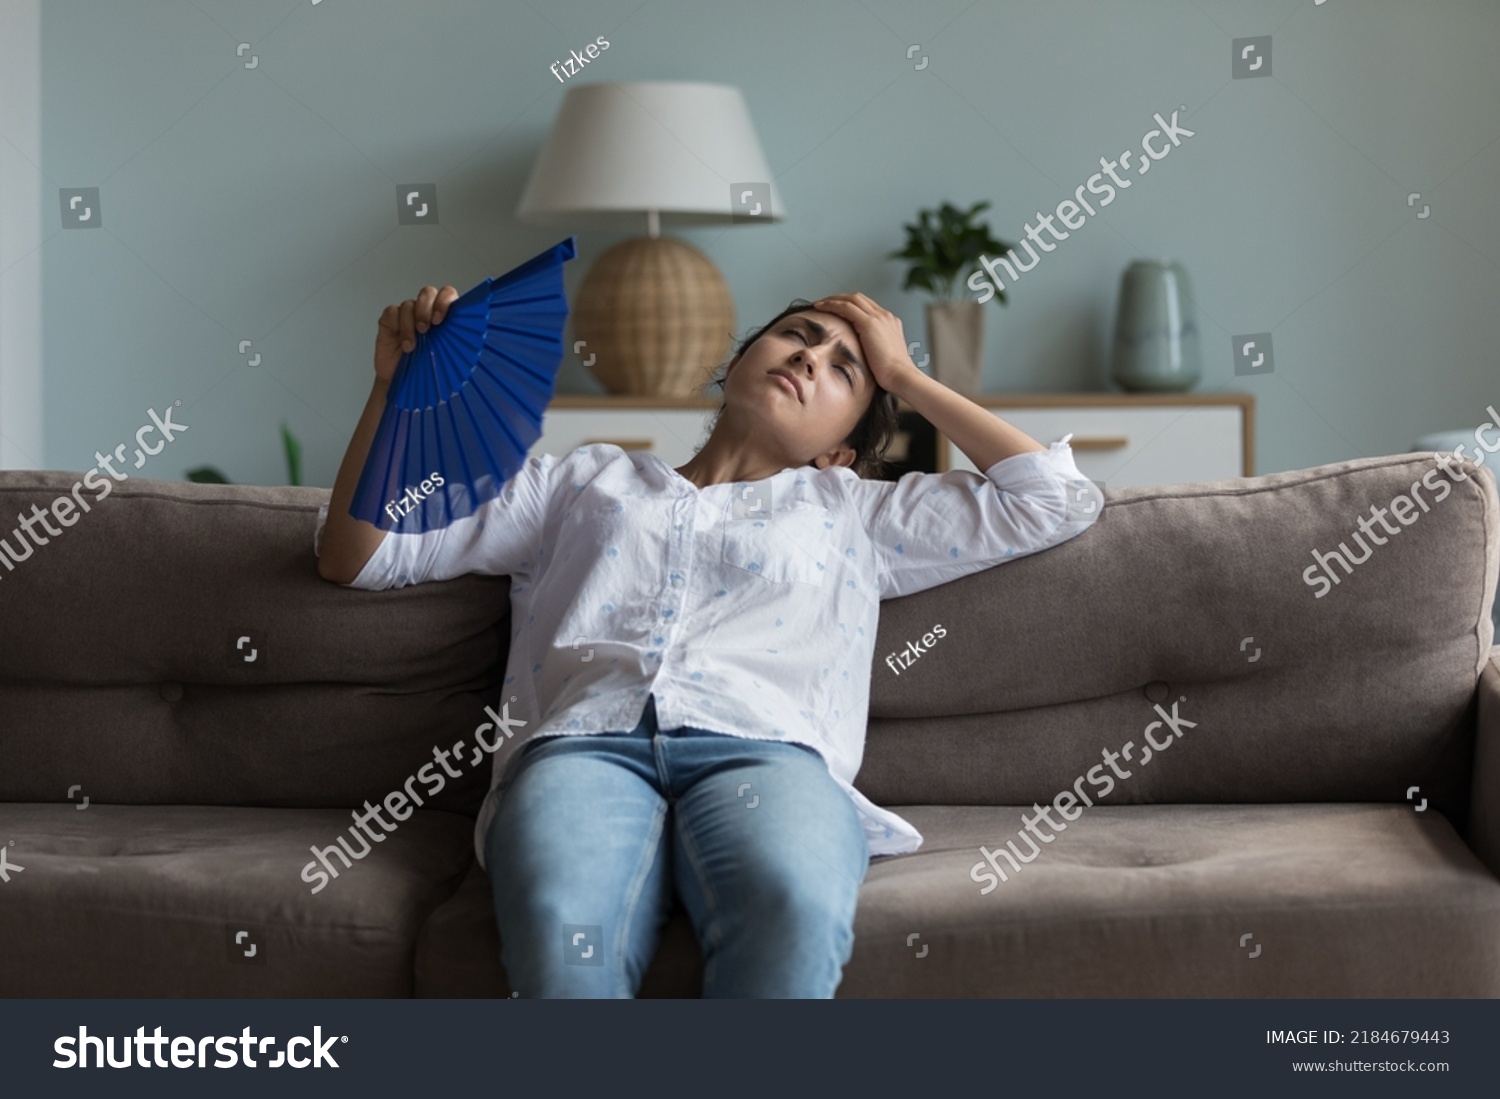 Exhausted young Indian girl feeling hot, tired, sick, resting on couch at home, waving paper handheld fan for cooking, suffering from heat attack, hypoxia, headache, touching head #2184679443